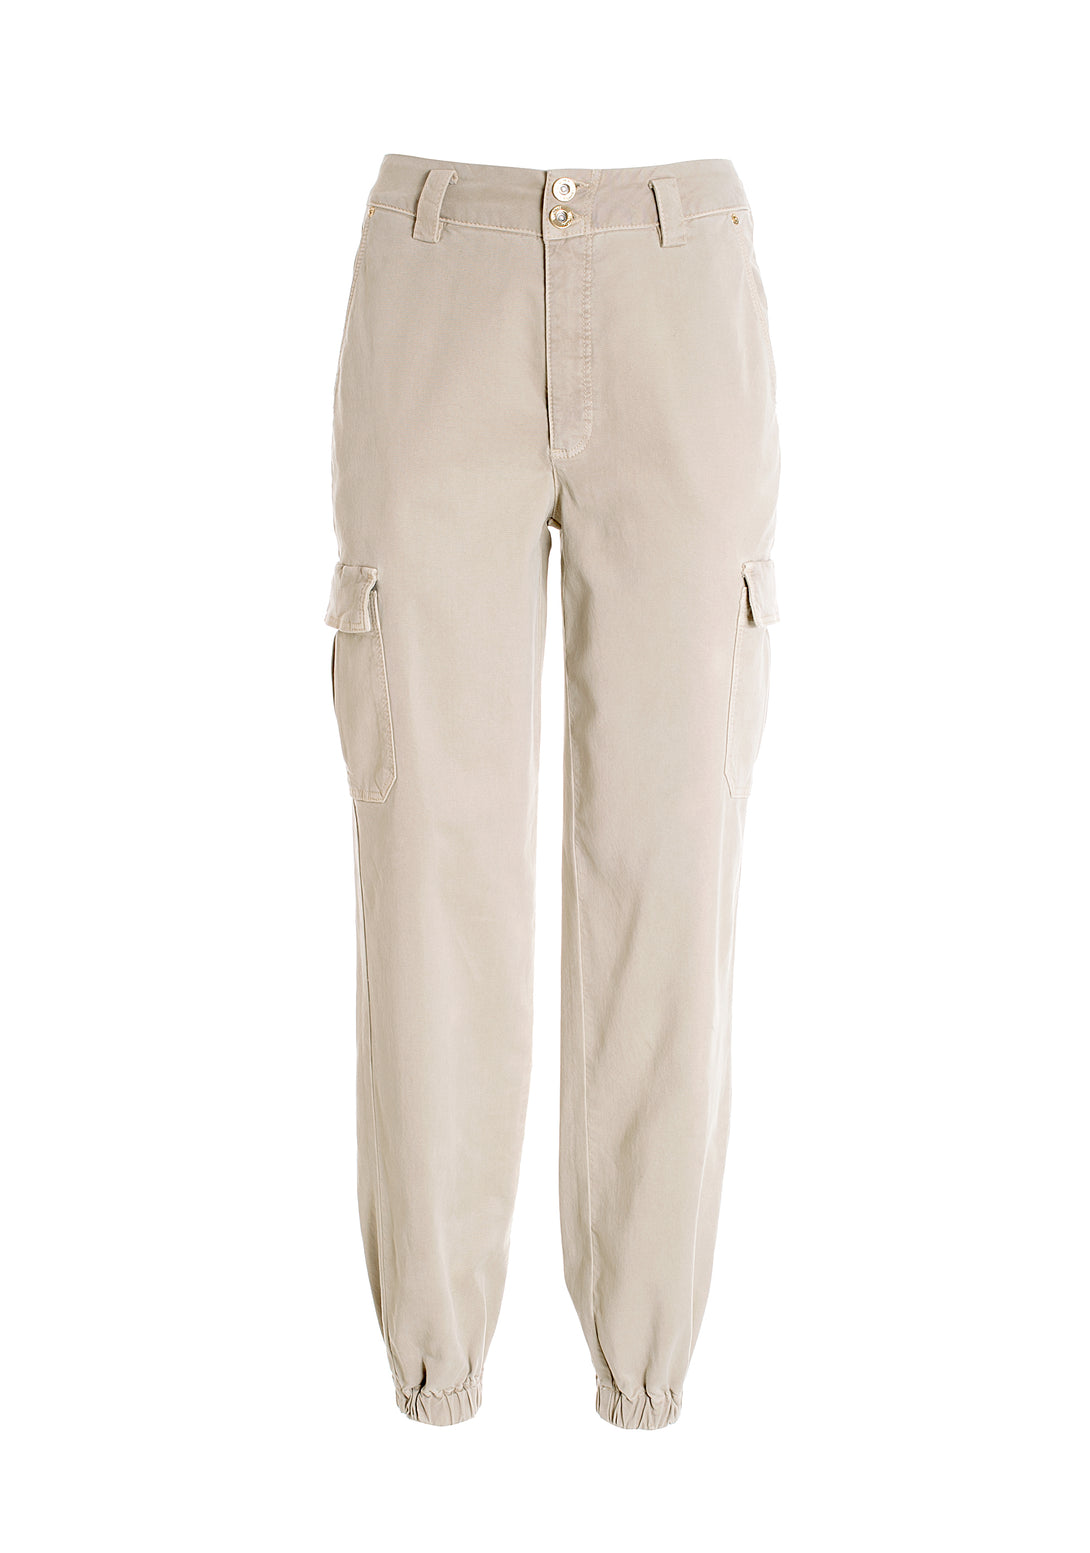 Pant cargo fit made in tencel fabric